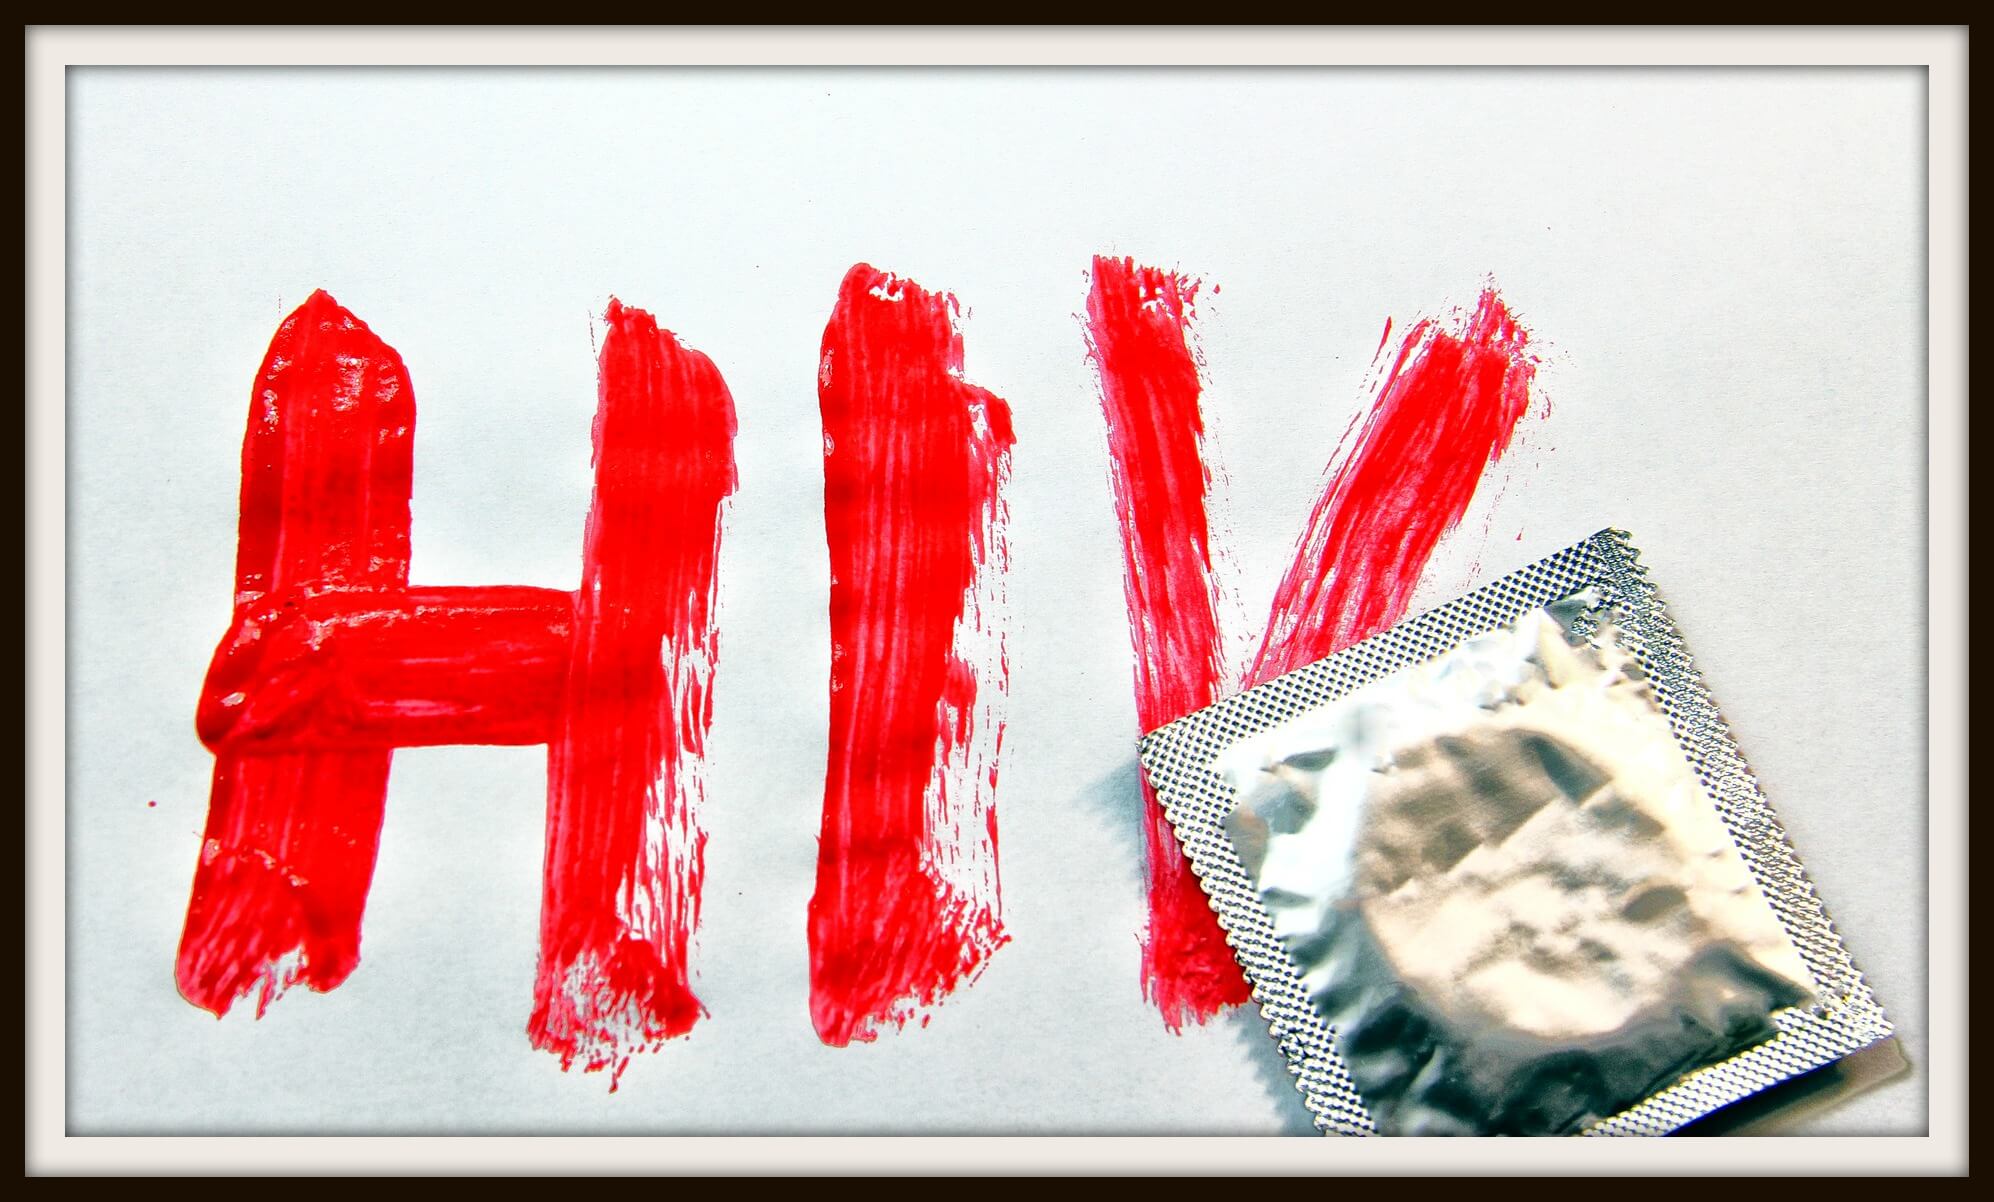 Ask Rene: Do I Tell My Friend Her Son Has HIV?